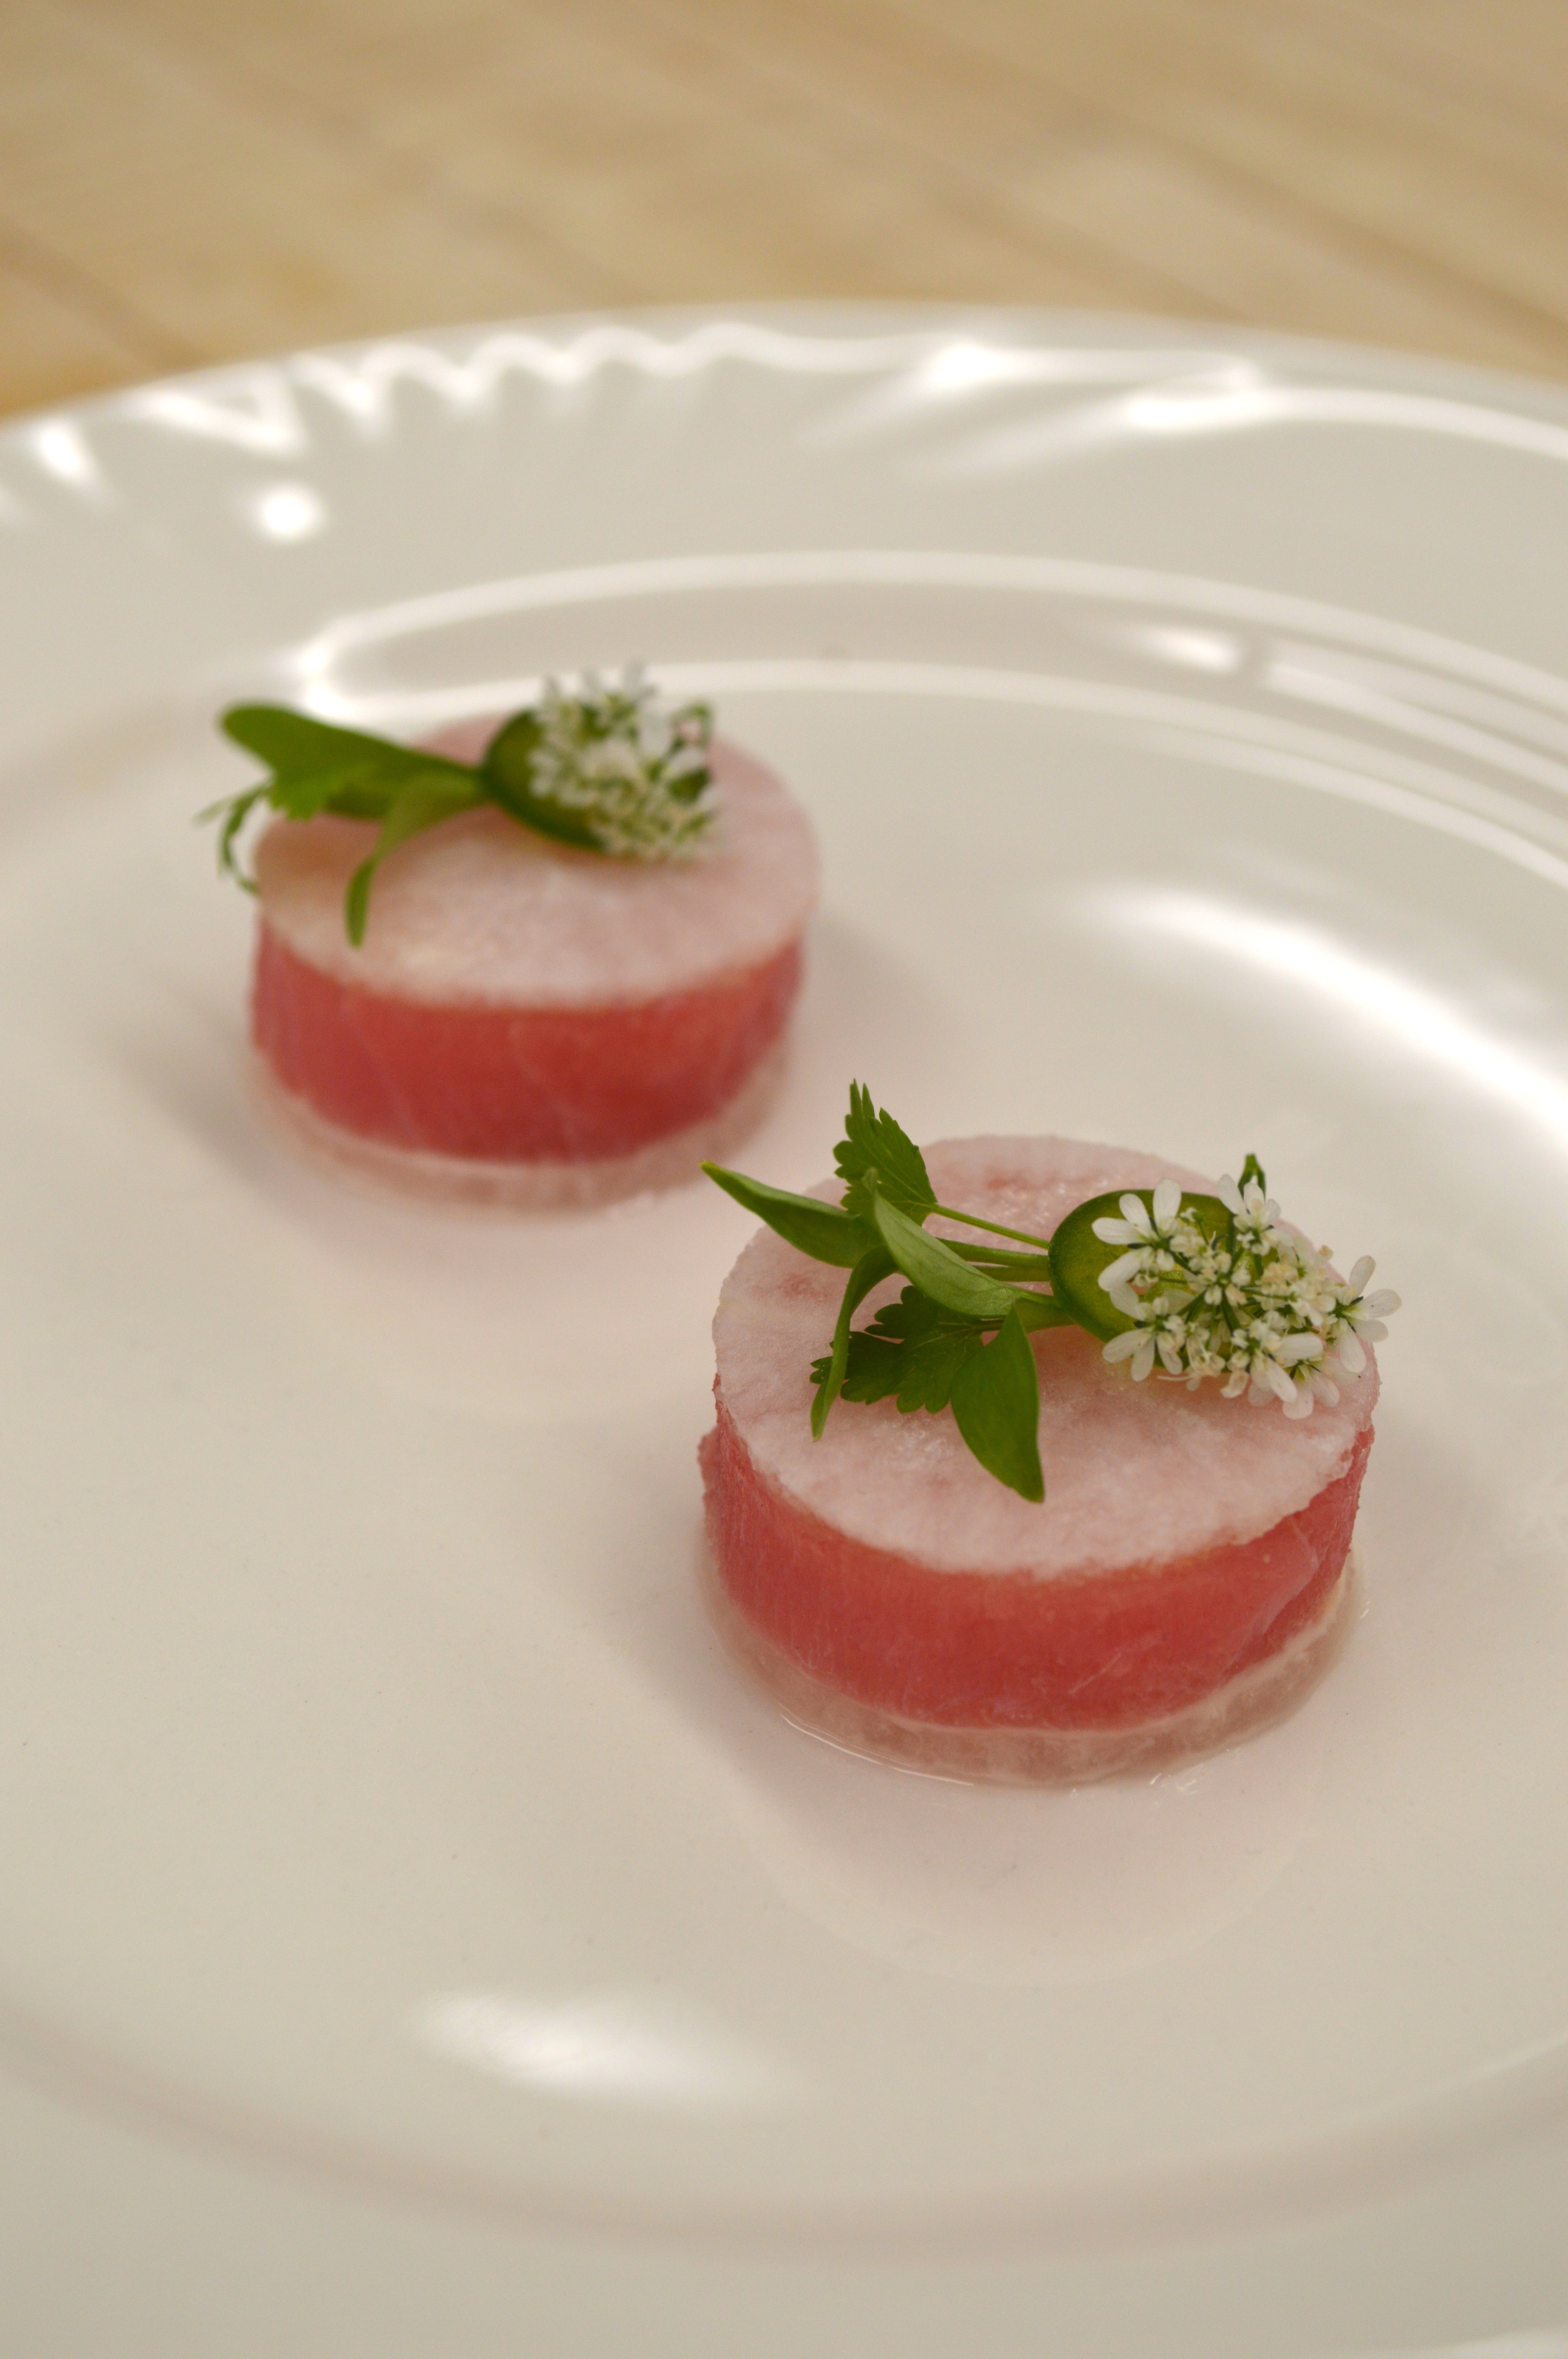 A "Tuna Sandwich" hors d'oeuvre inspired by Eleven Madison Park